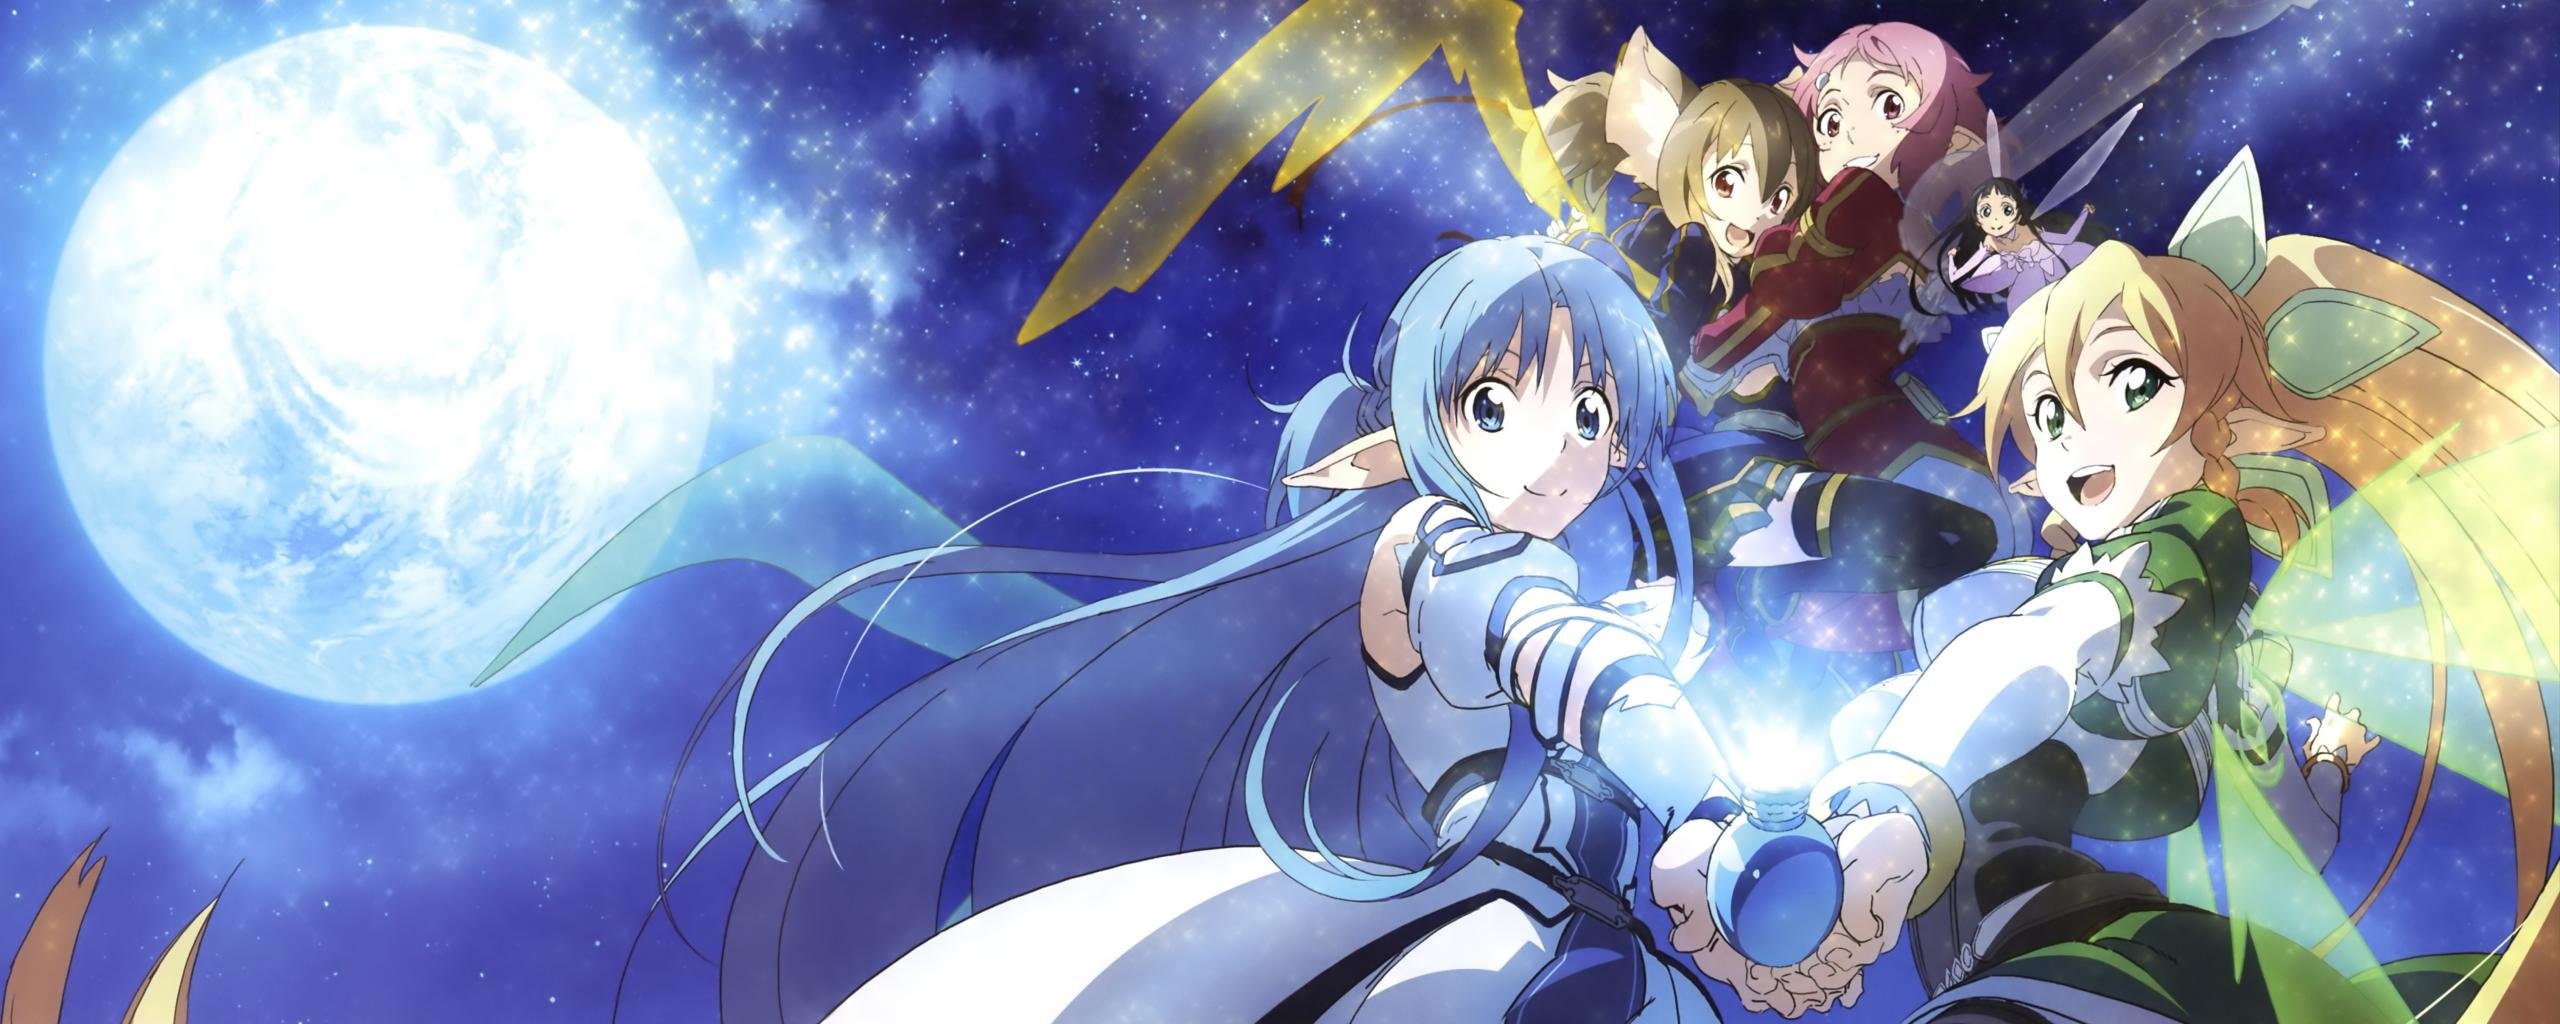 Free Sword Art Online 2 High Quality Background Id - Sword Art Online Song Collection Case - HD Wallpaper 